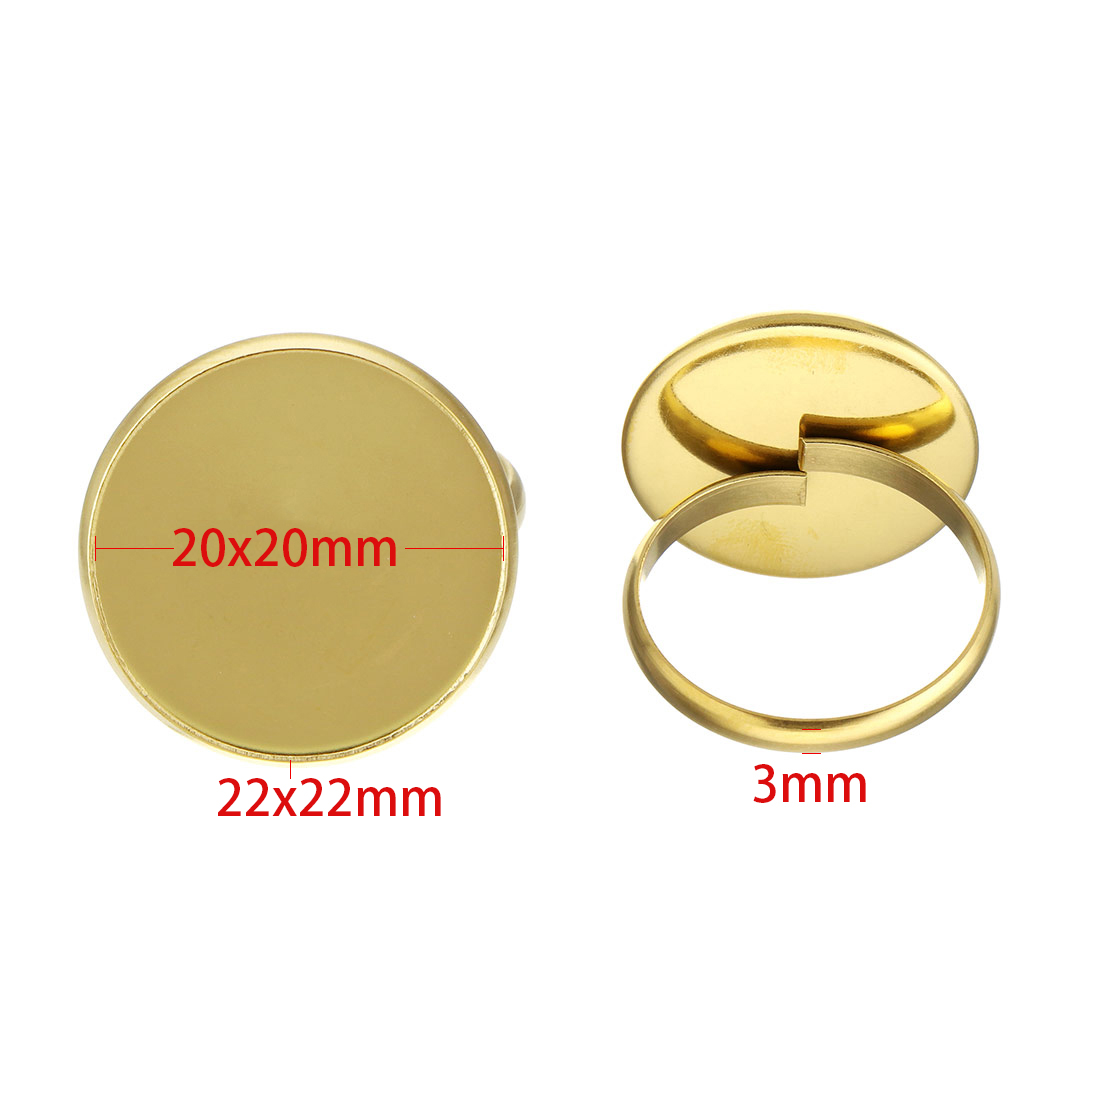 2:gold 22*22mm